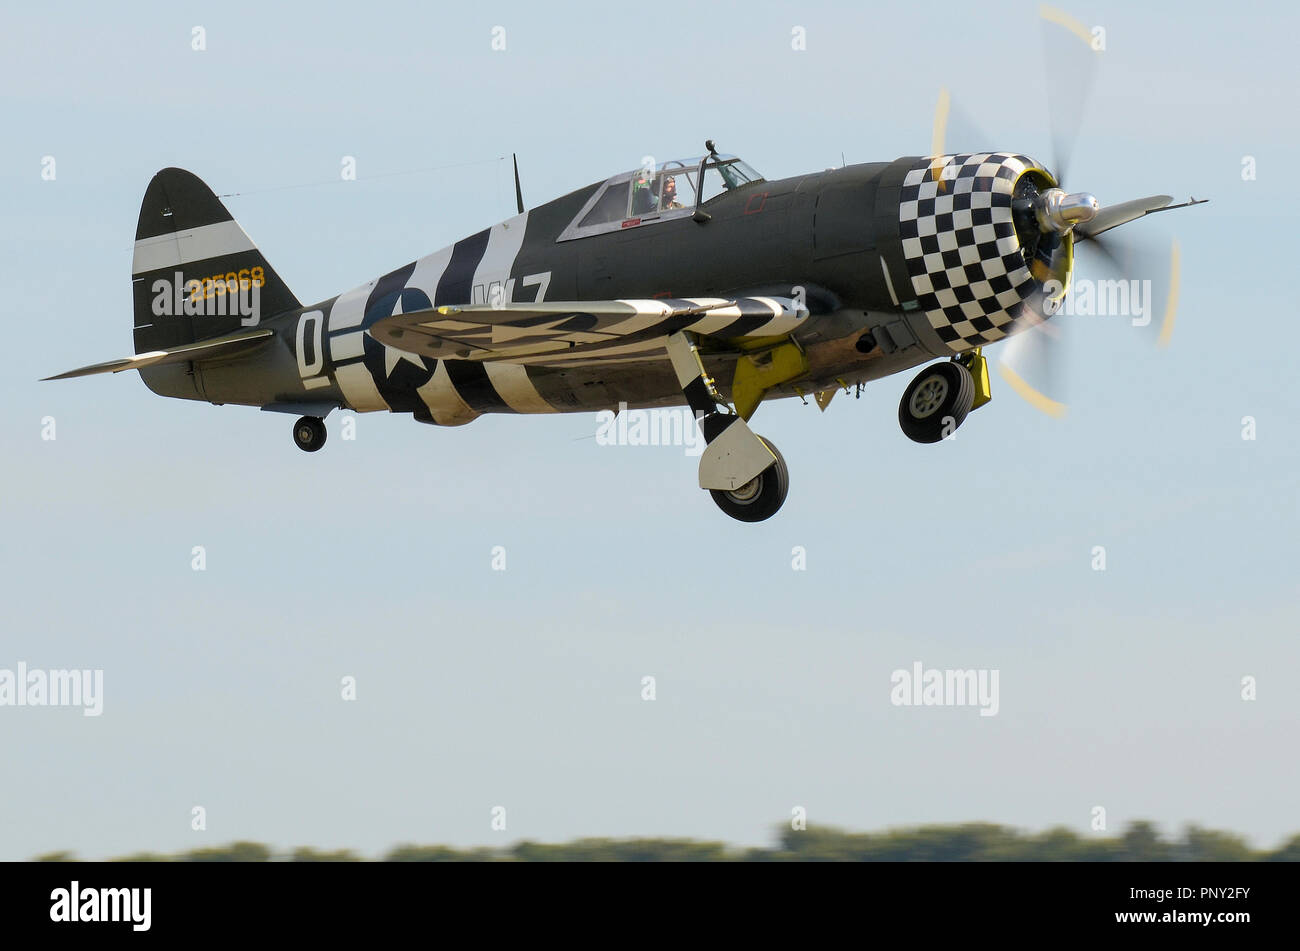 Republic P-47 Thunderbolt Second World War fighter plane in olive drab with invasion stripes and checkerboard nose cowling. Flying Stock Photo